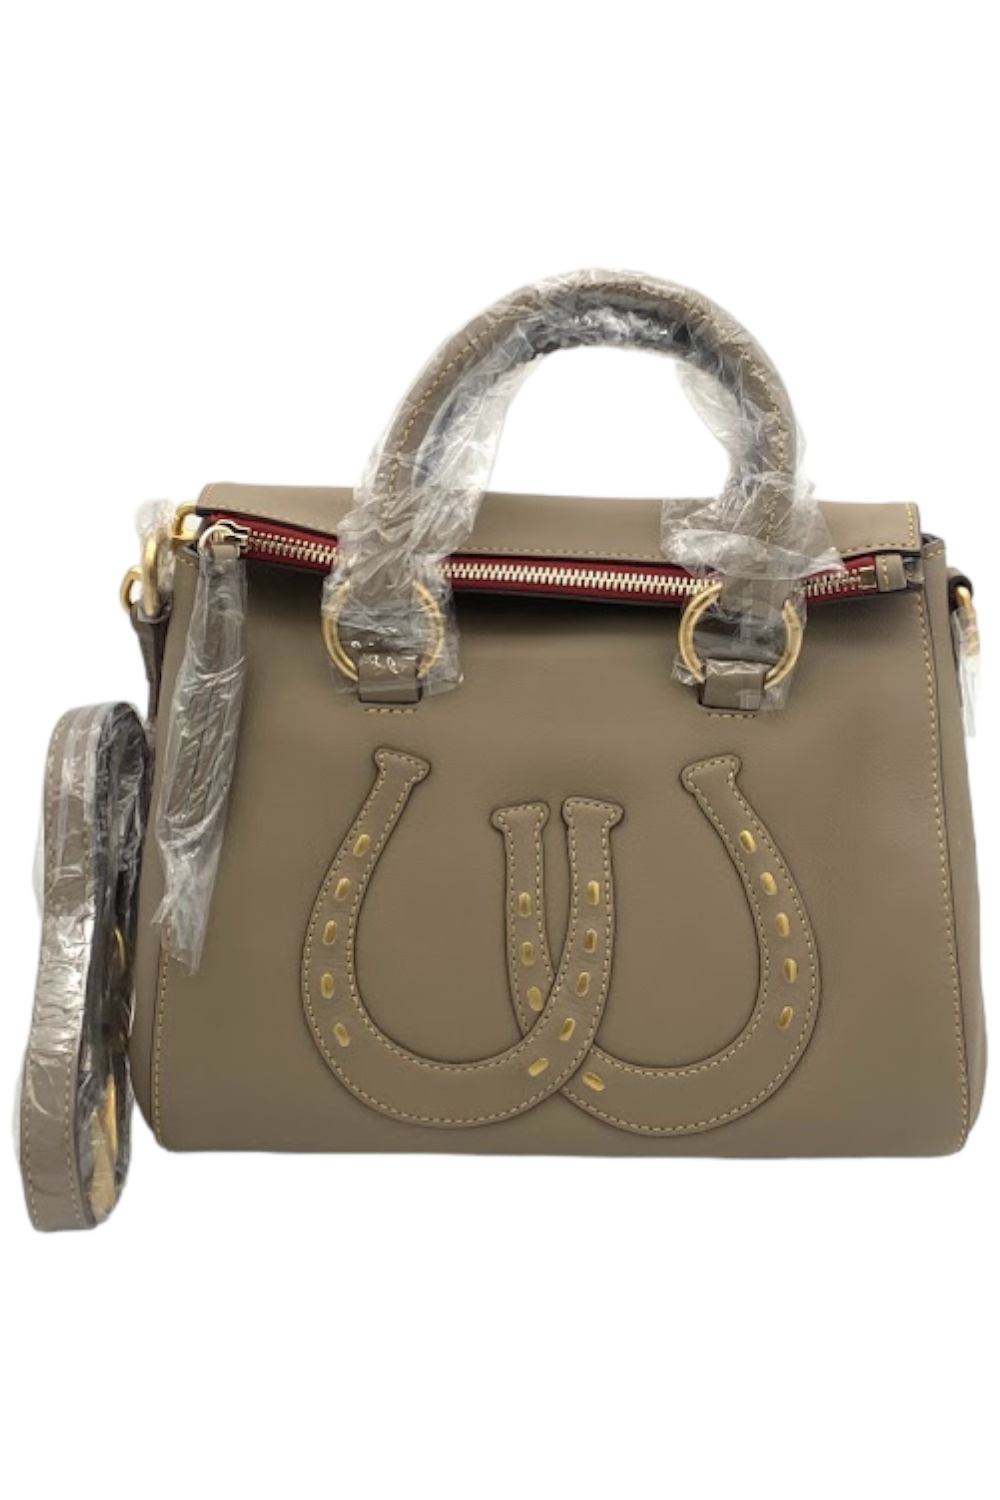 Dolce & Gabbana Small Sicily East West Leather Satchel in Natural